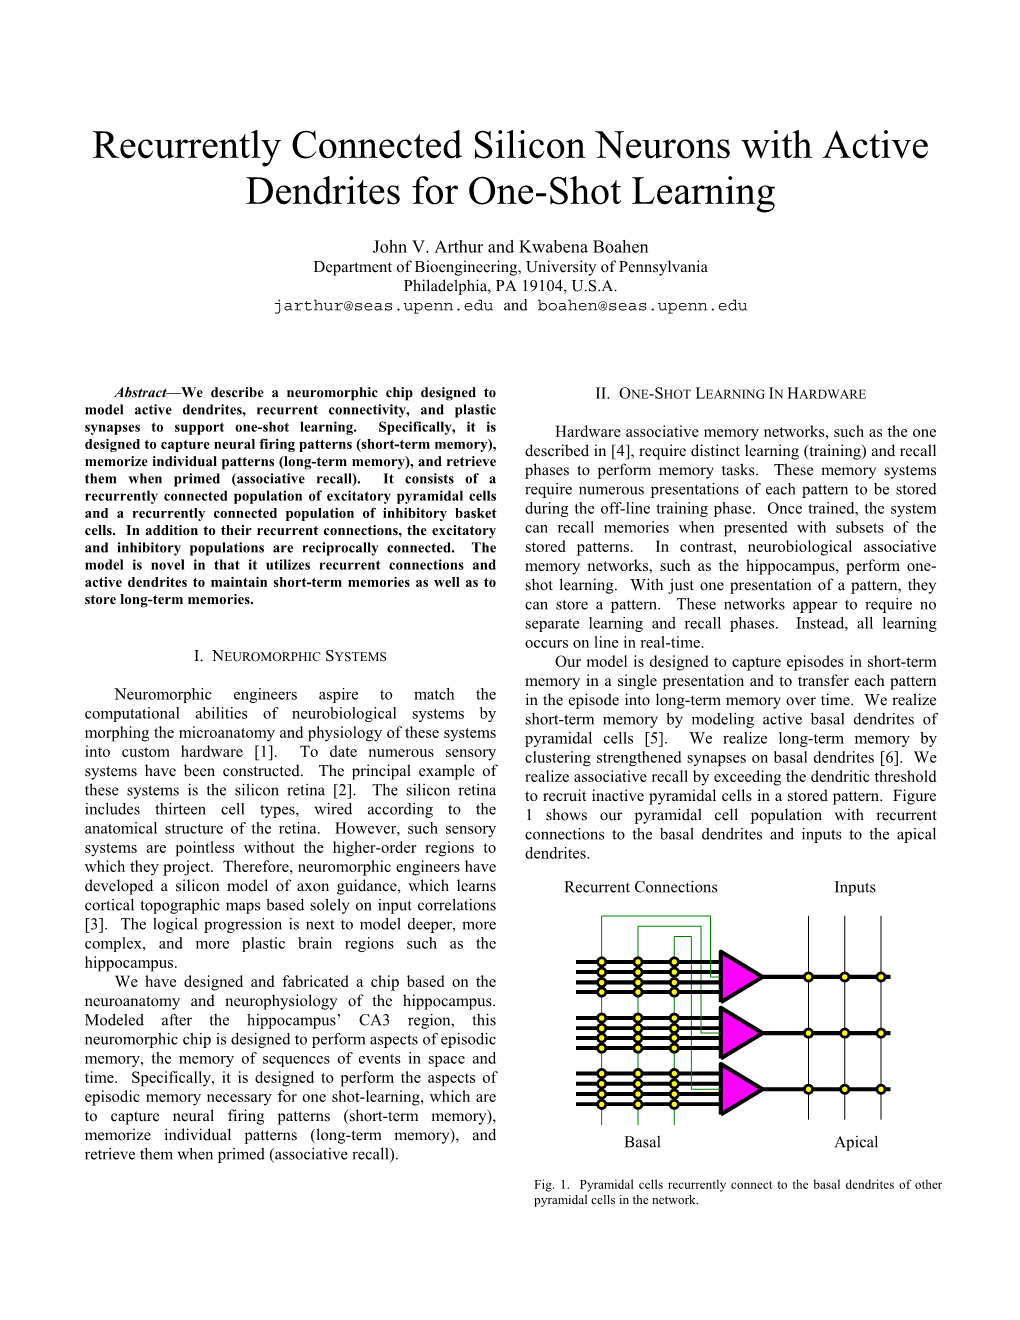 Recurrently Connected Silicon Neurons with Active Dendrites for One-Shot Learning